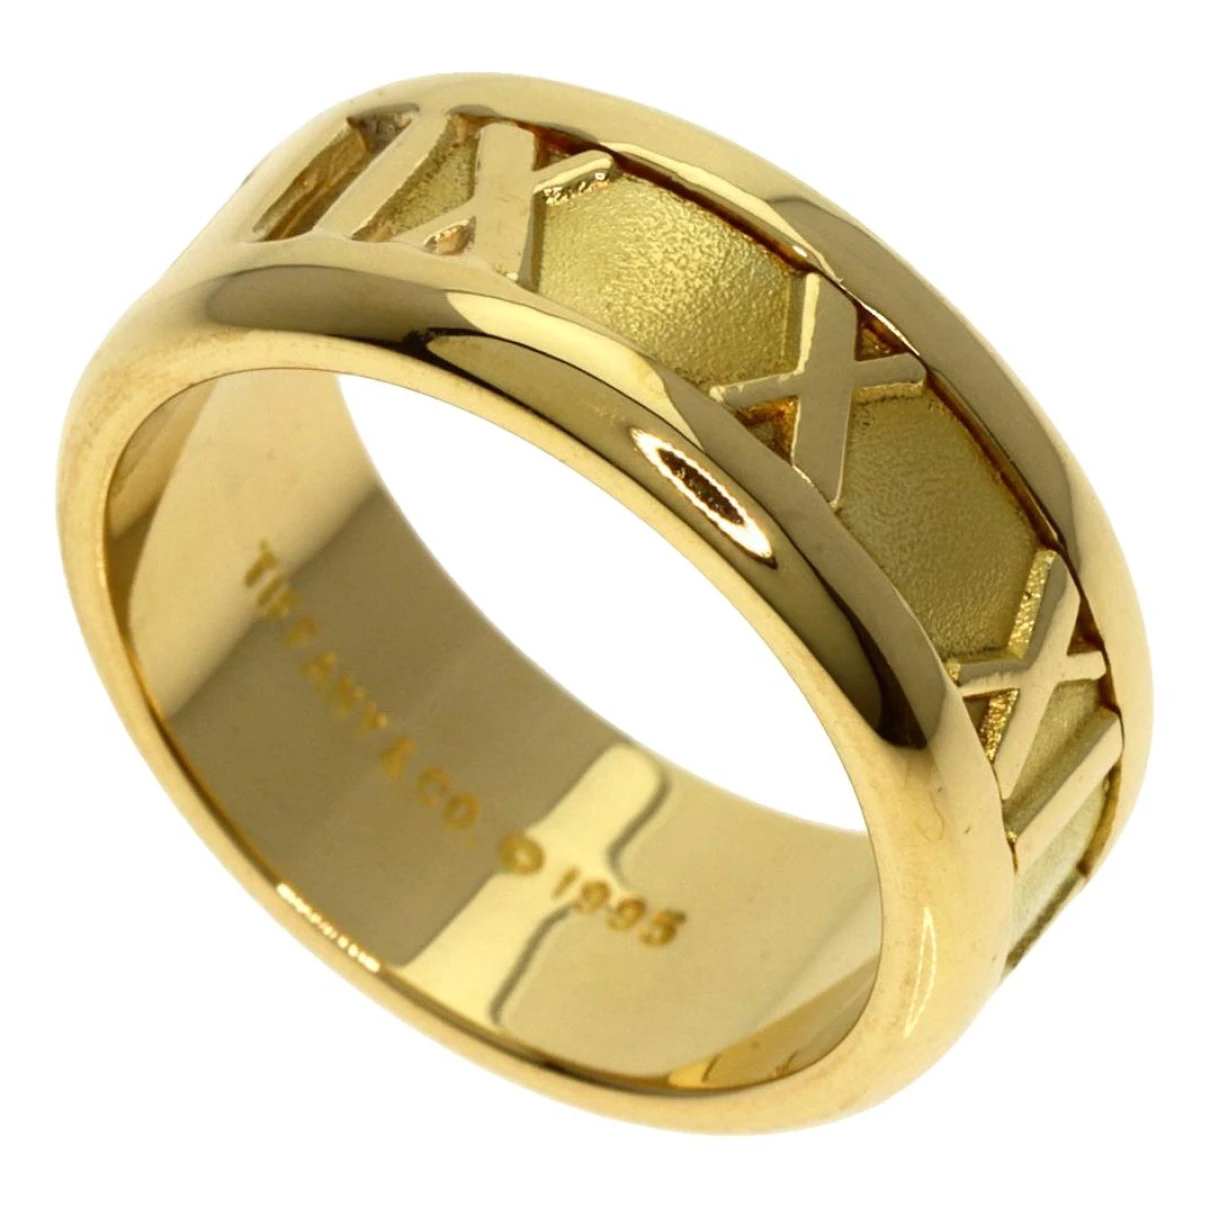 jewellery Tiffany & Co rings Atlas for Female Yellow gold 4 US. Used condition